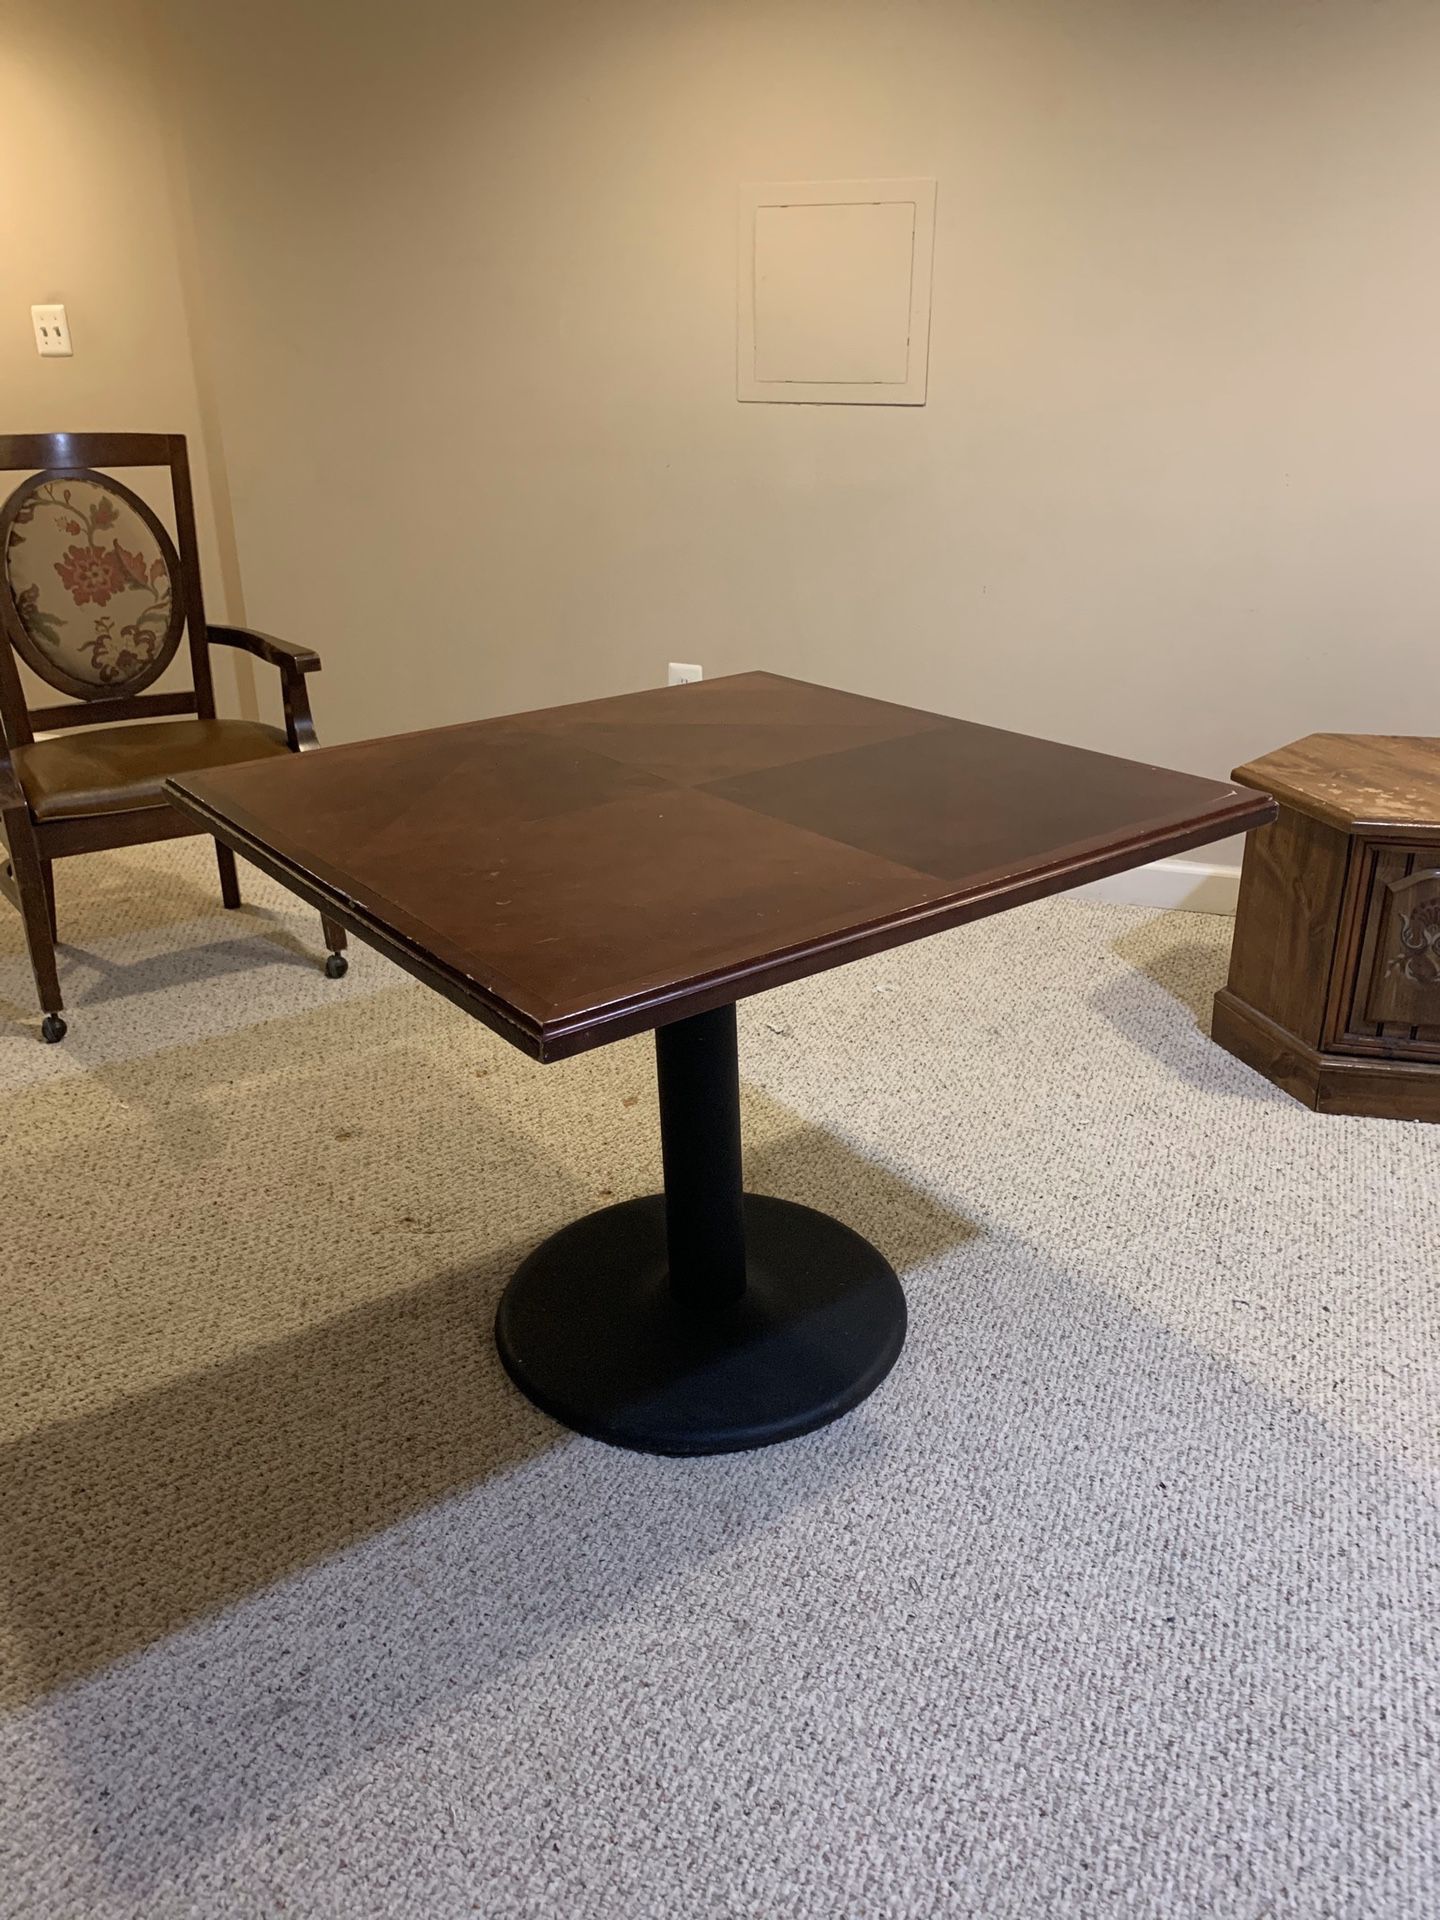 4 pieces of Tables 36” by 36”